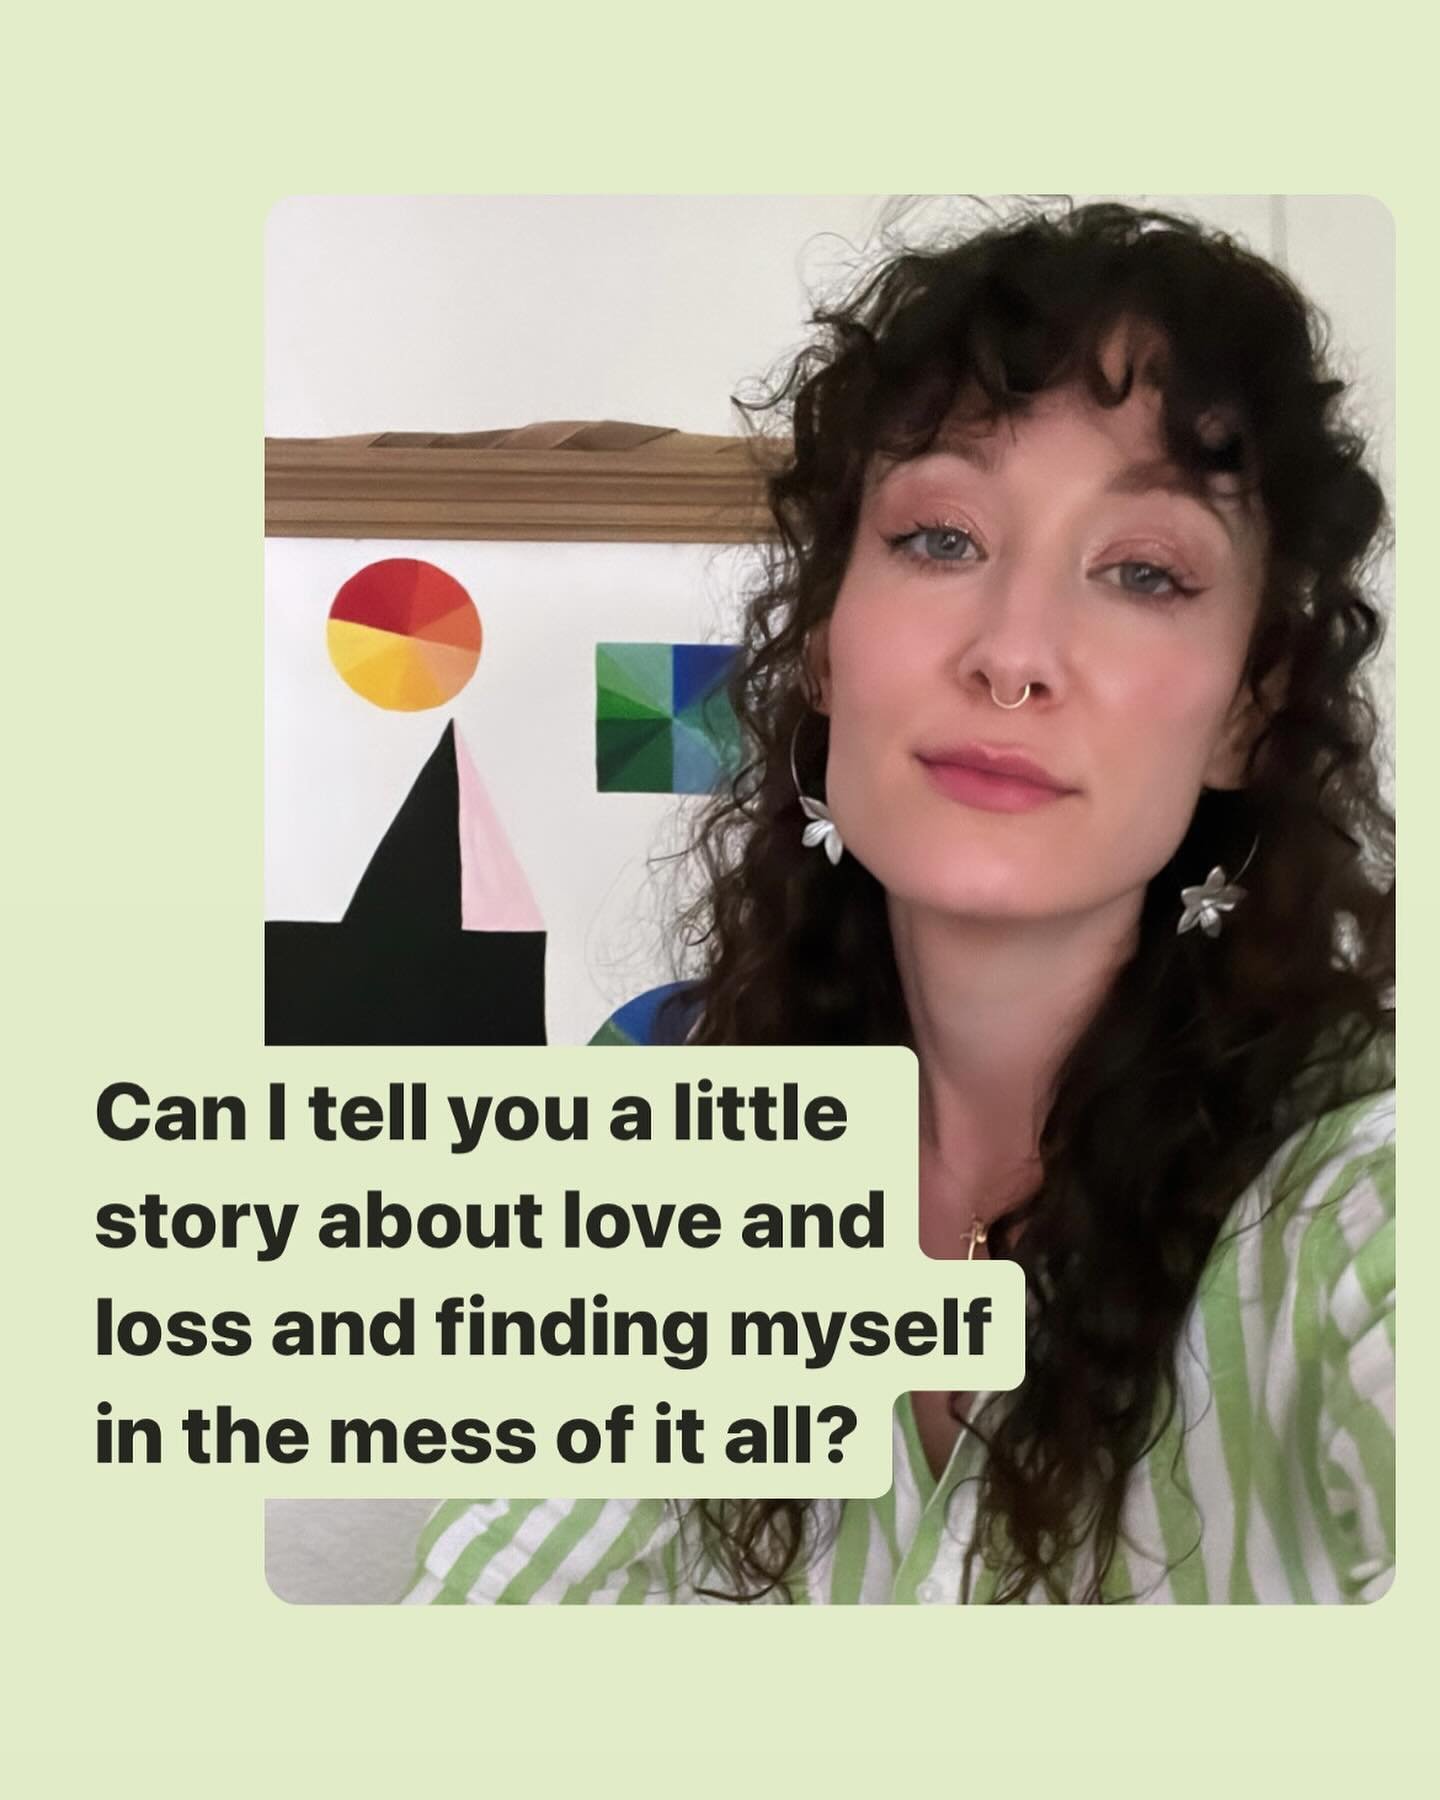 Over the last decade, I&rsquo;ve done my fair share of &ldquo;coming out&rdquo; &amp; wandering lost, looking for my people&hellip; looking for myself. 
 
Due to early imprints of un-belonging, gaslighting, and abuse, I couldn&rsquo;t see myself clea